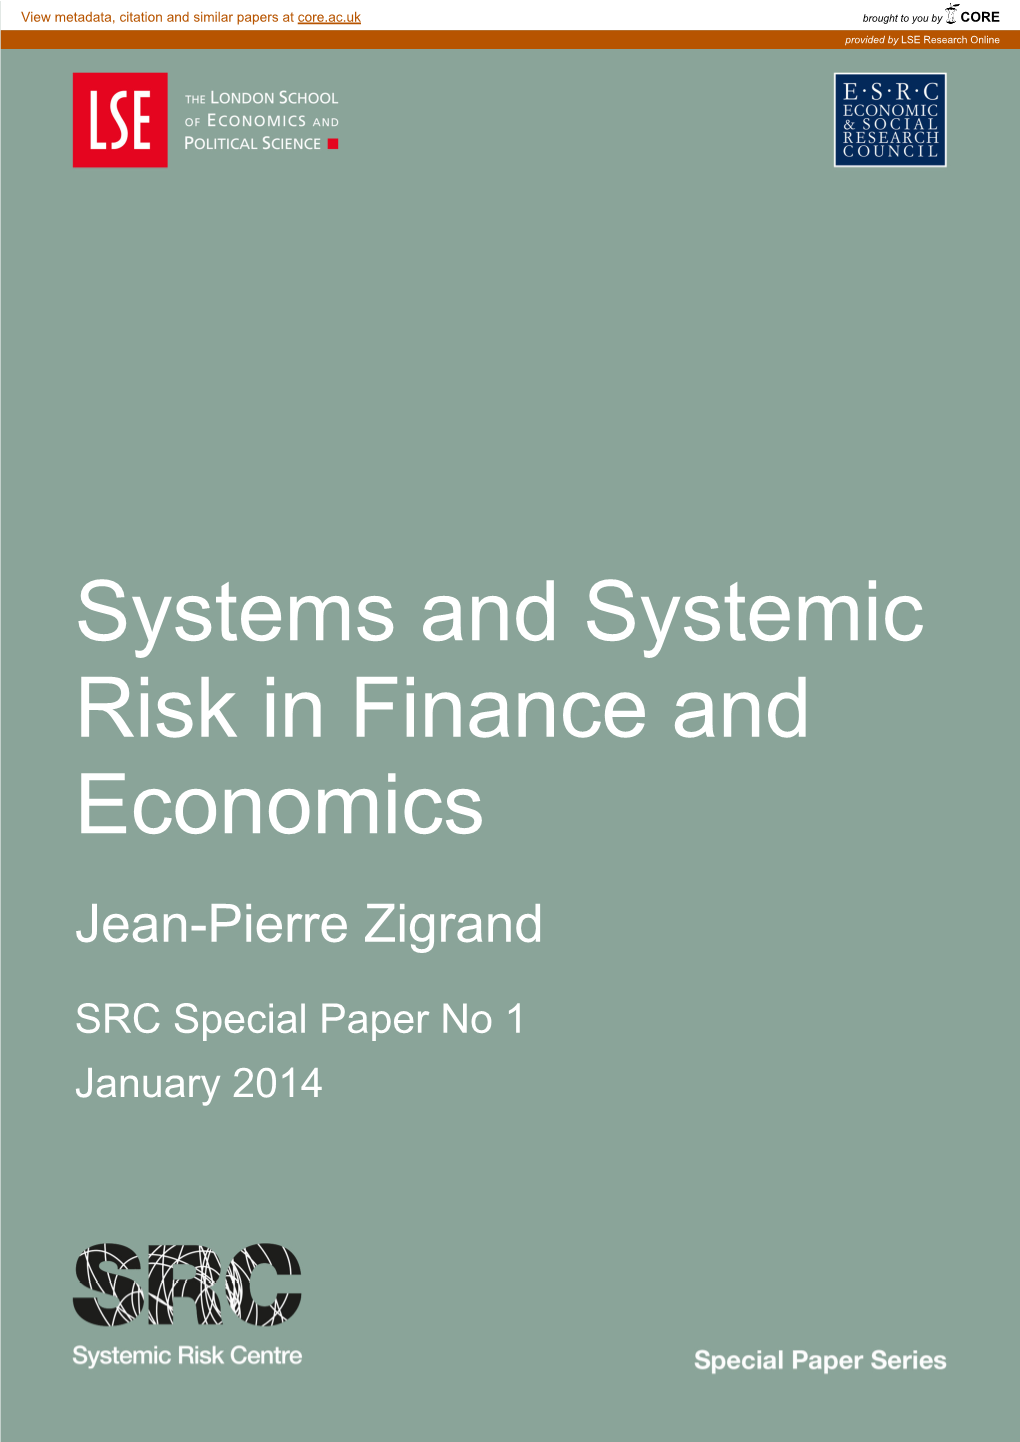 Systems and Systemic Risk in Finance and Economics Jean-Pierre Zigrand